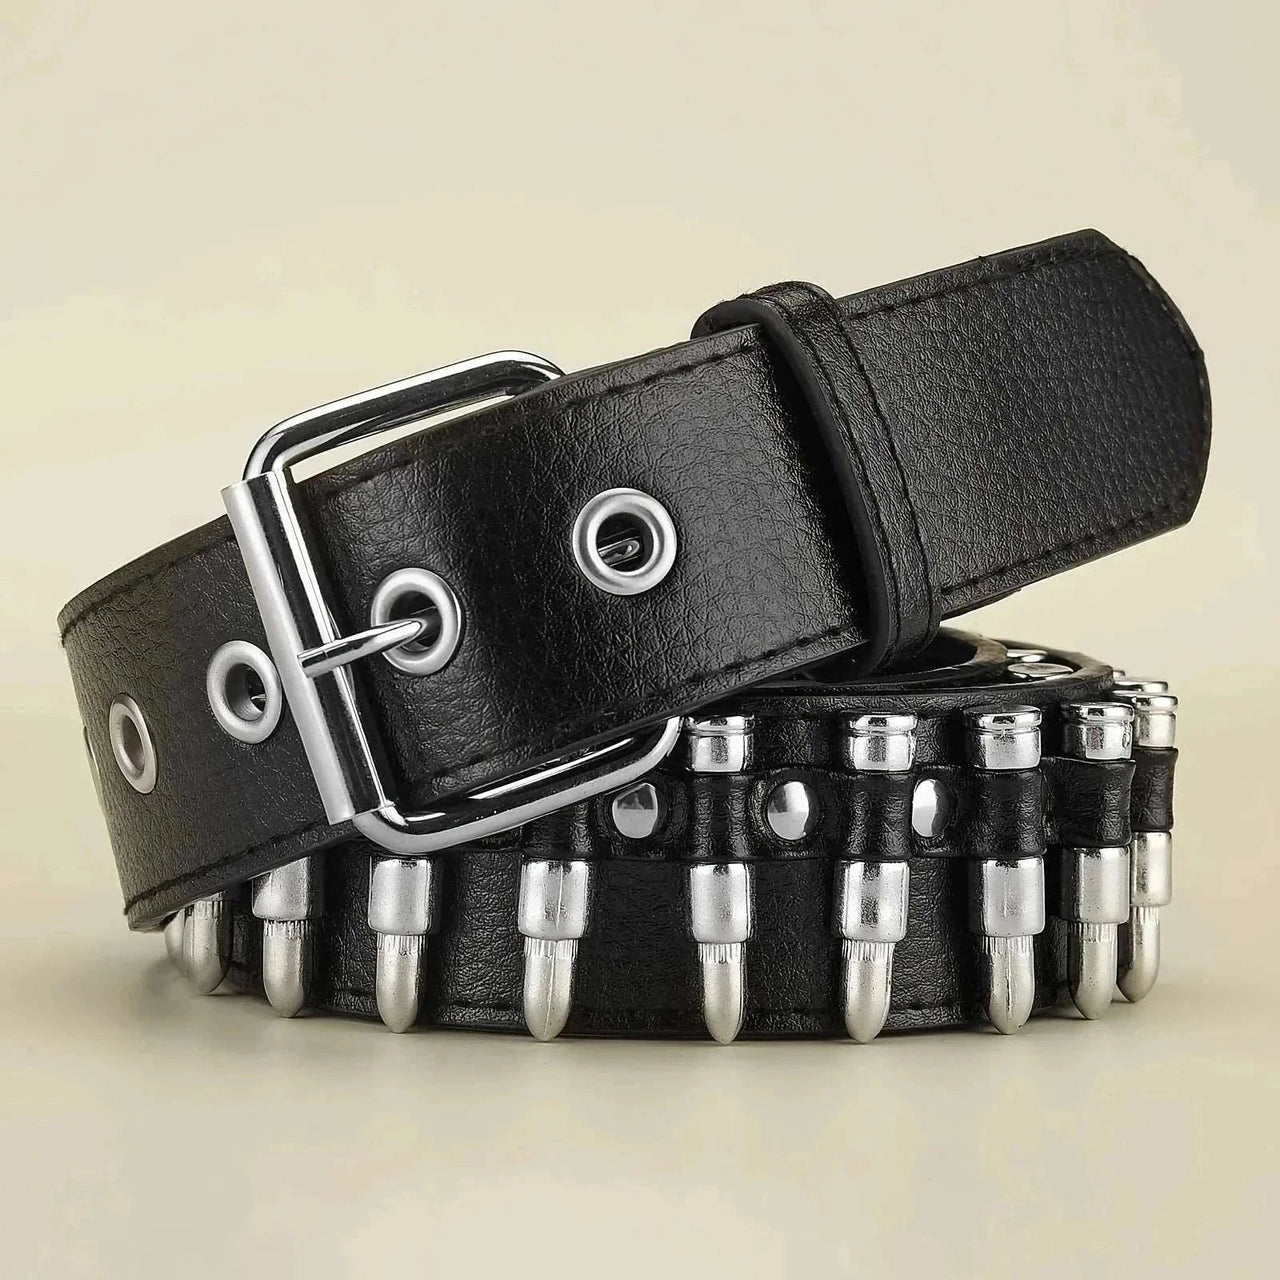 Stud Edge Belt: The Ultimate Fashion Upgrade. - Affordable streetwear  from swagstreet wear - Just £24.99! Shop now at swagstreet wear